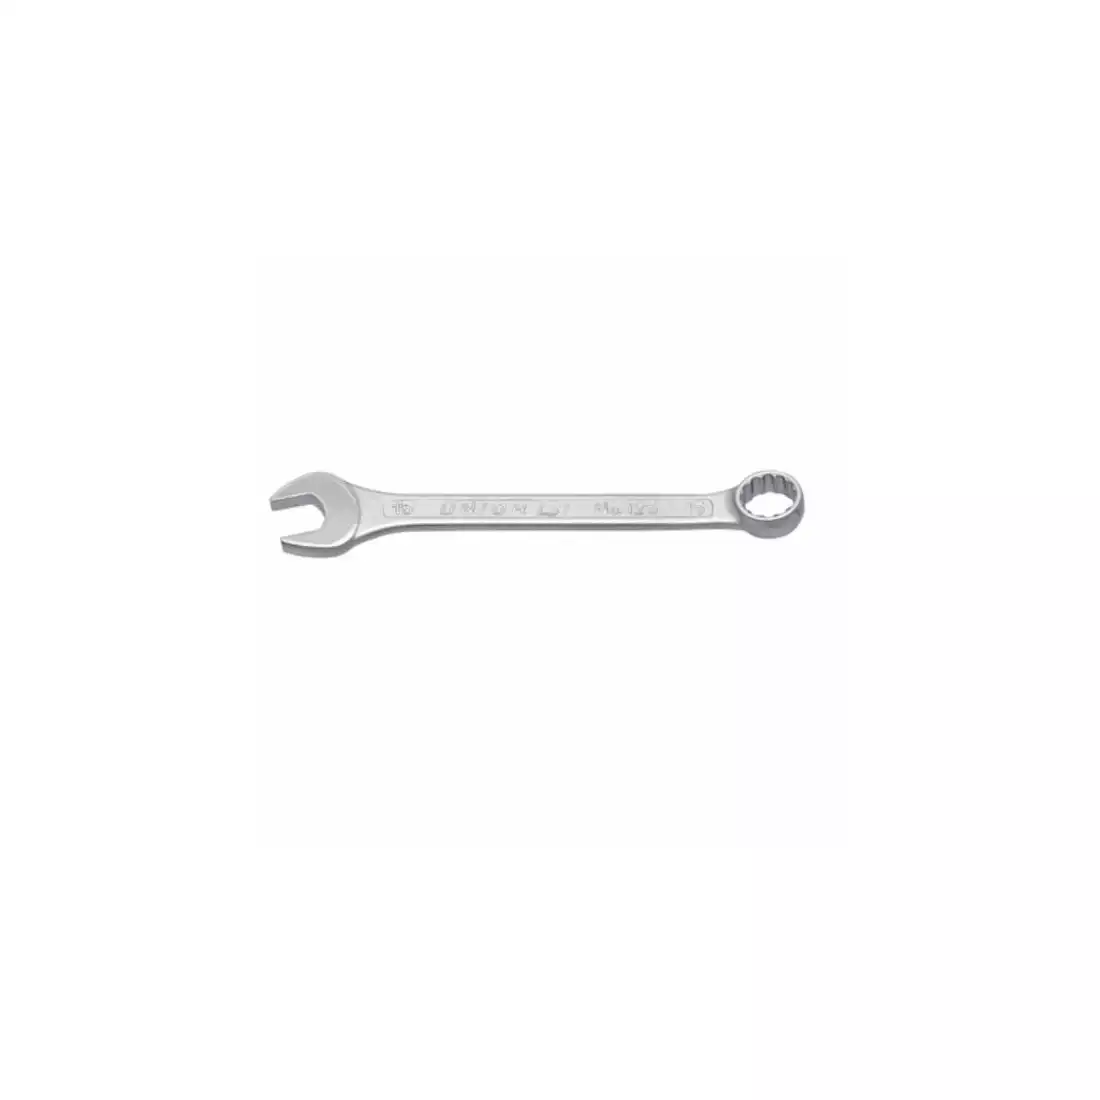 UNIOR combination wrench, short type 12 mm